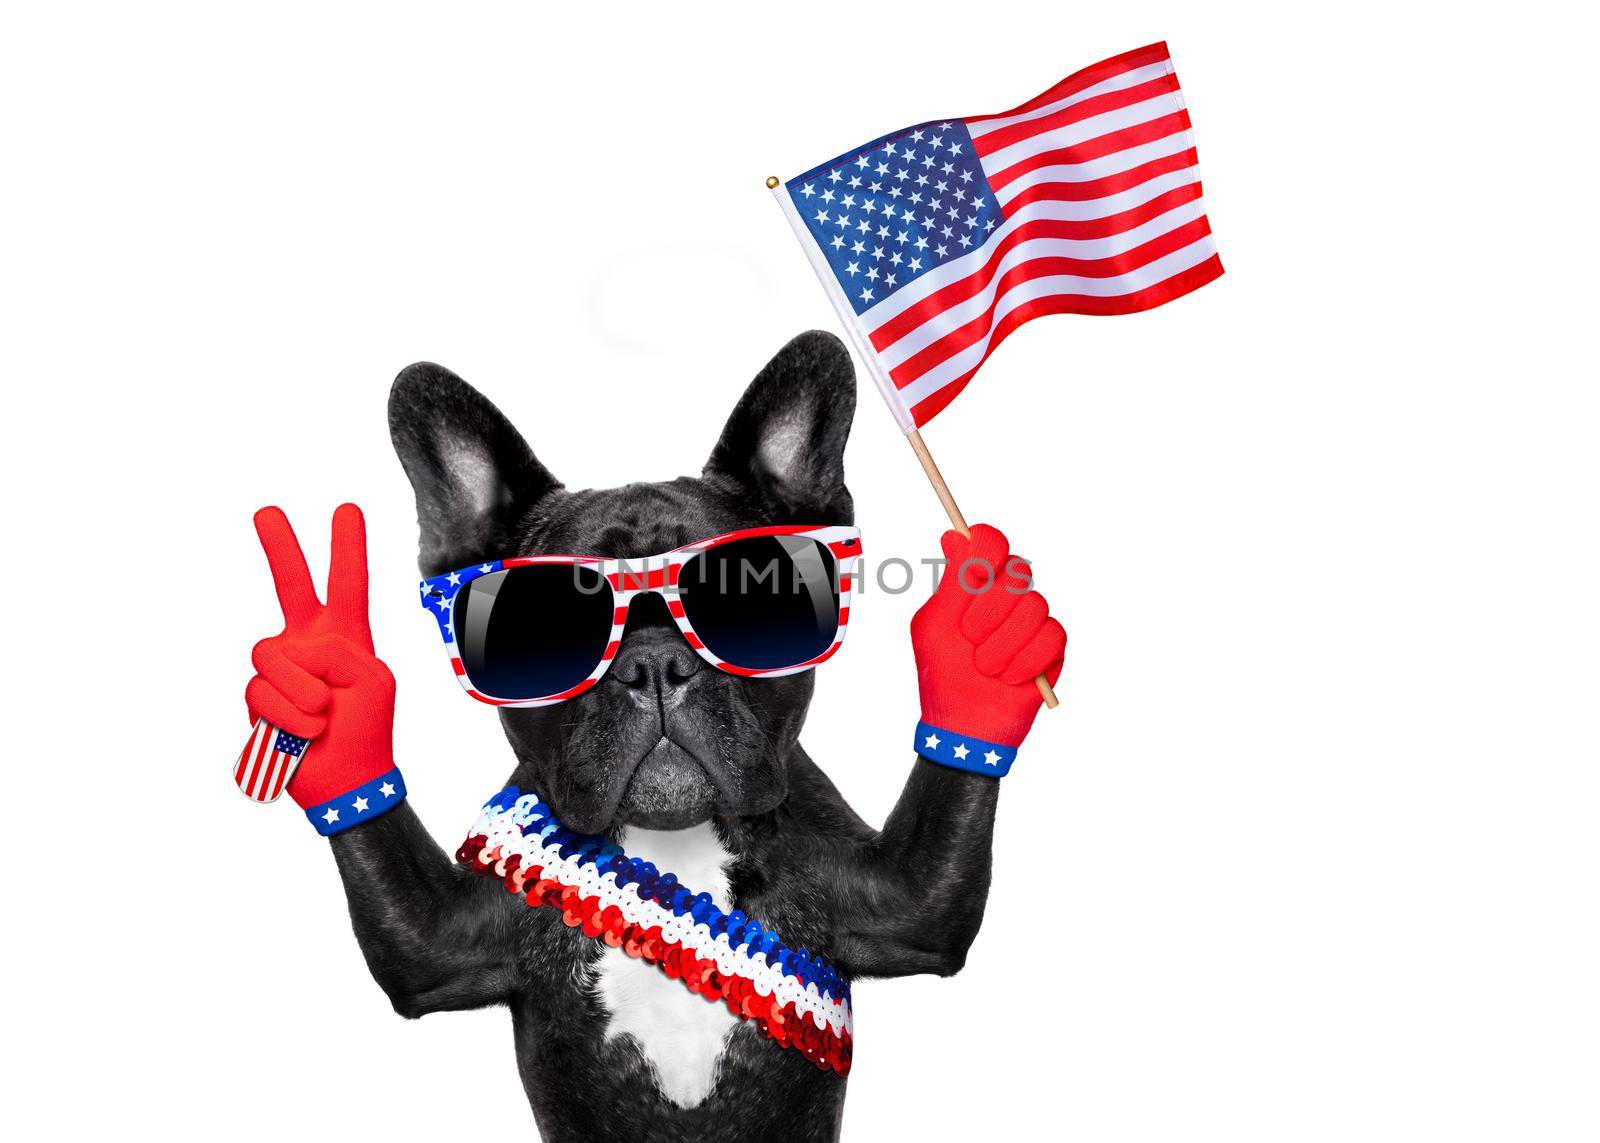 french bulldog  waving a flag of usa on independence day on 4th  of july , isolated on white background,  victory or peace fingers